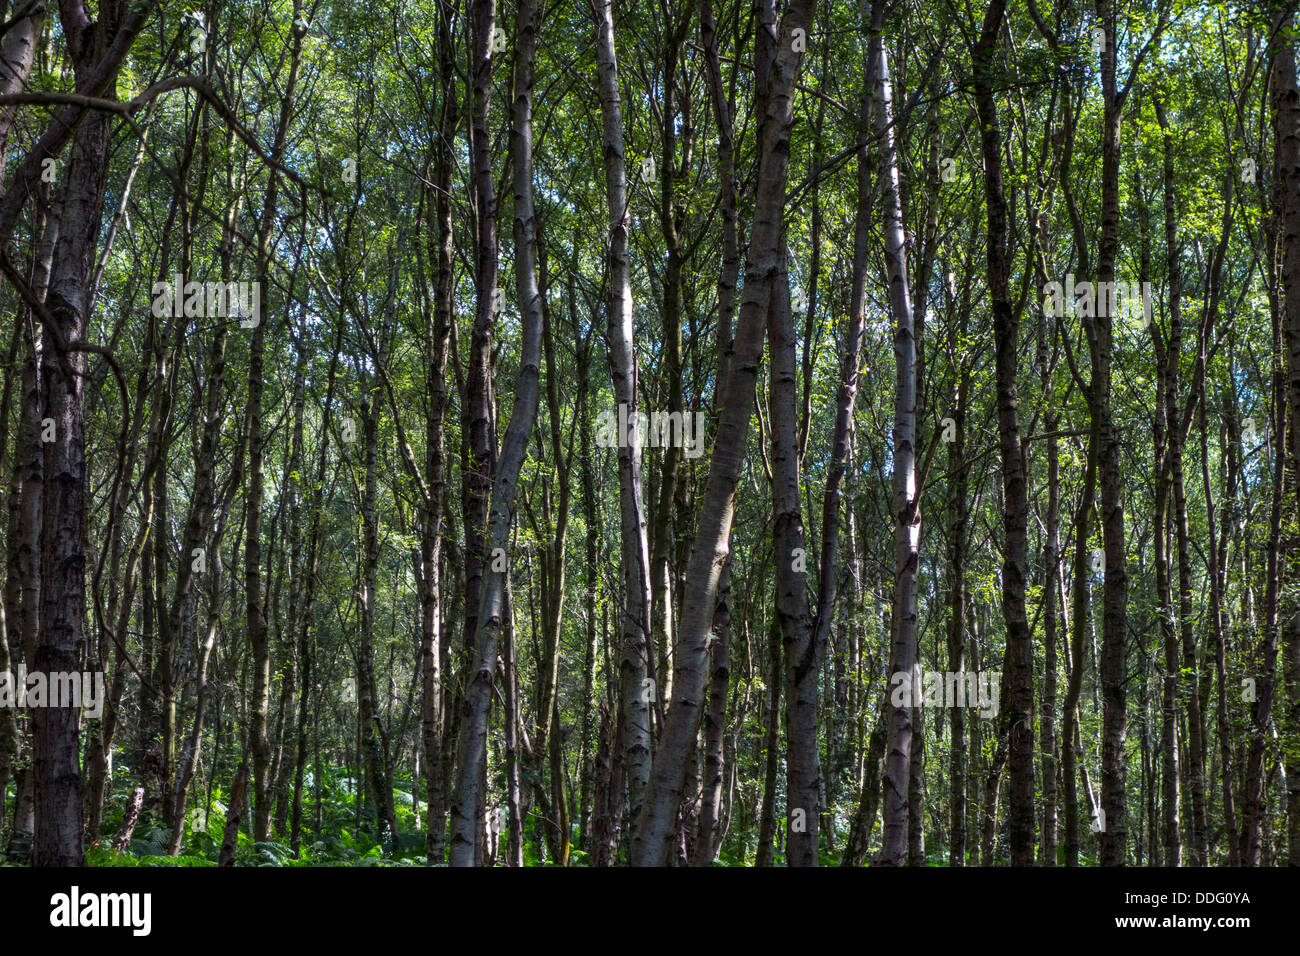 Silver birch trees growing in mature woodland with sunshine Stock Photo